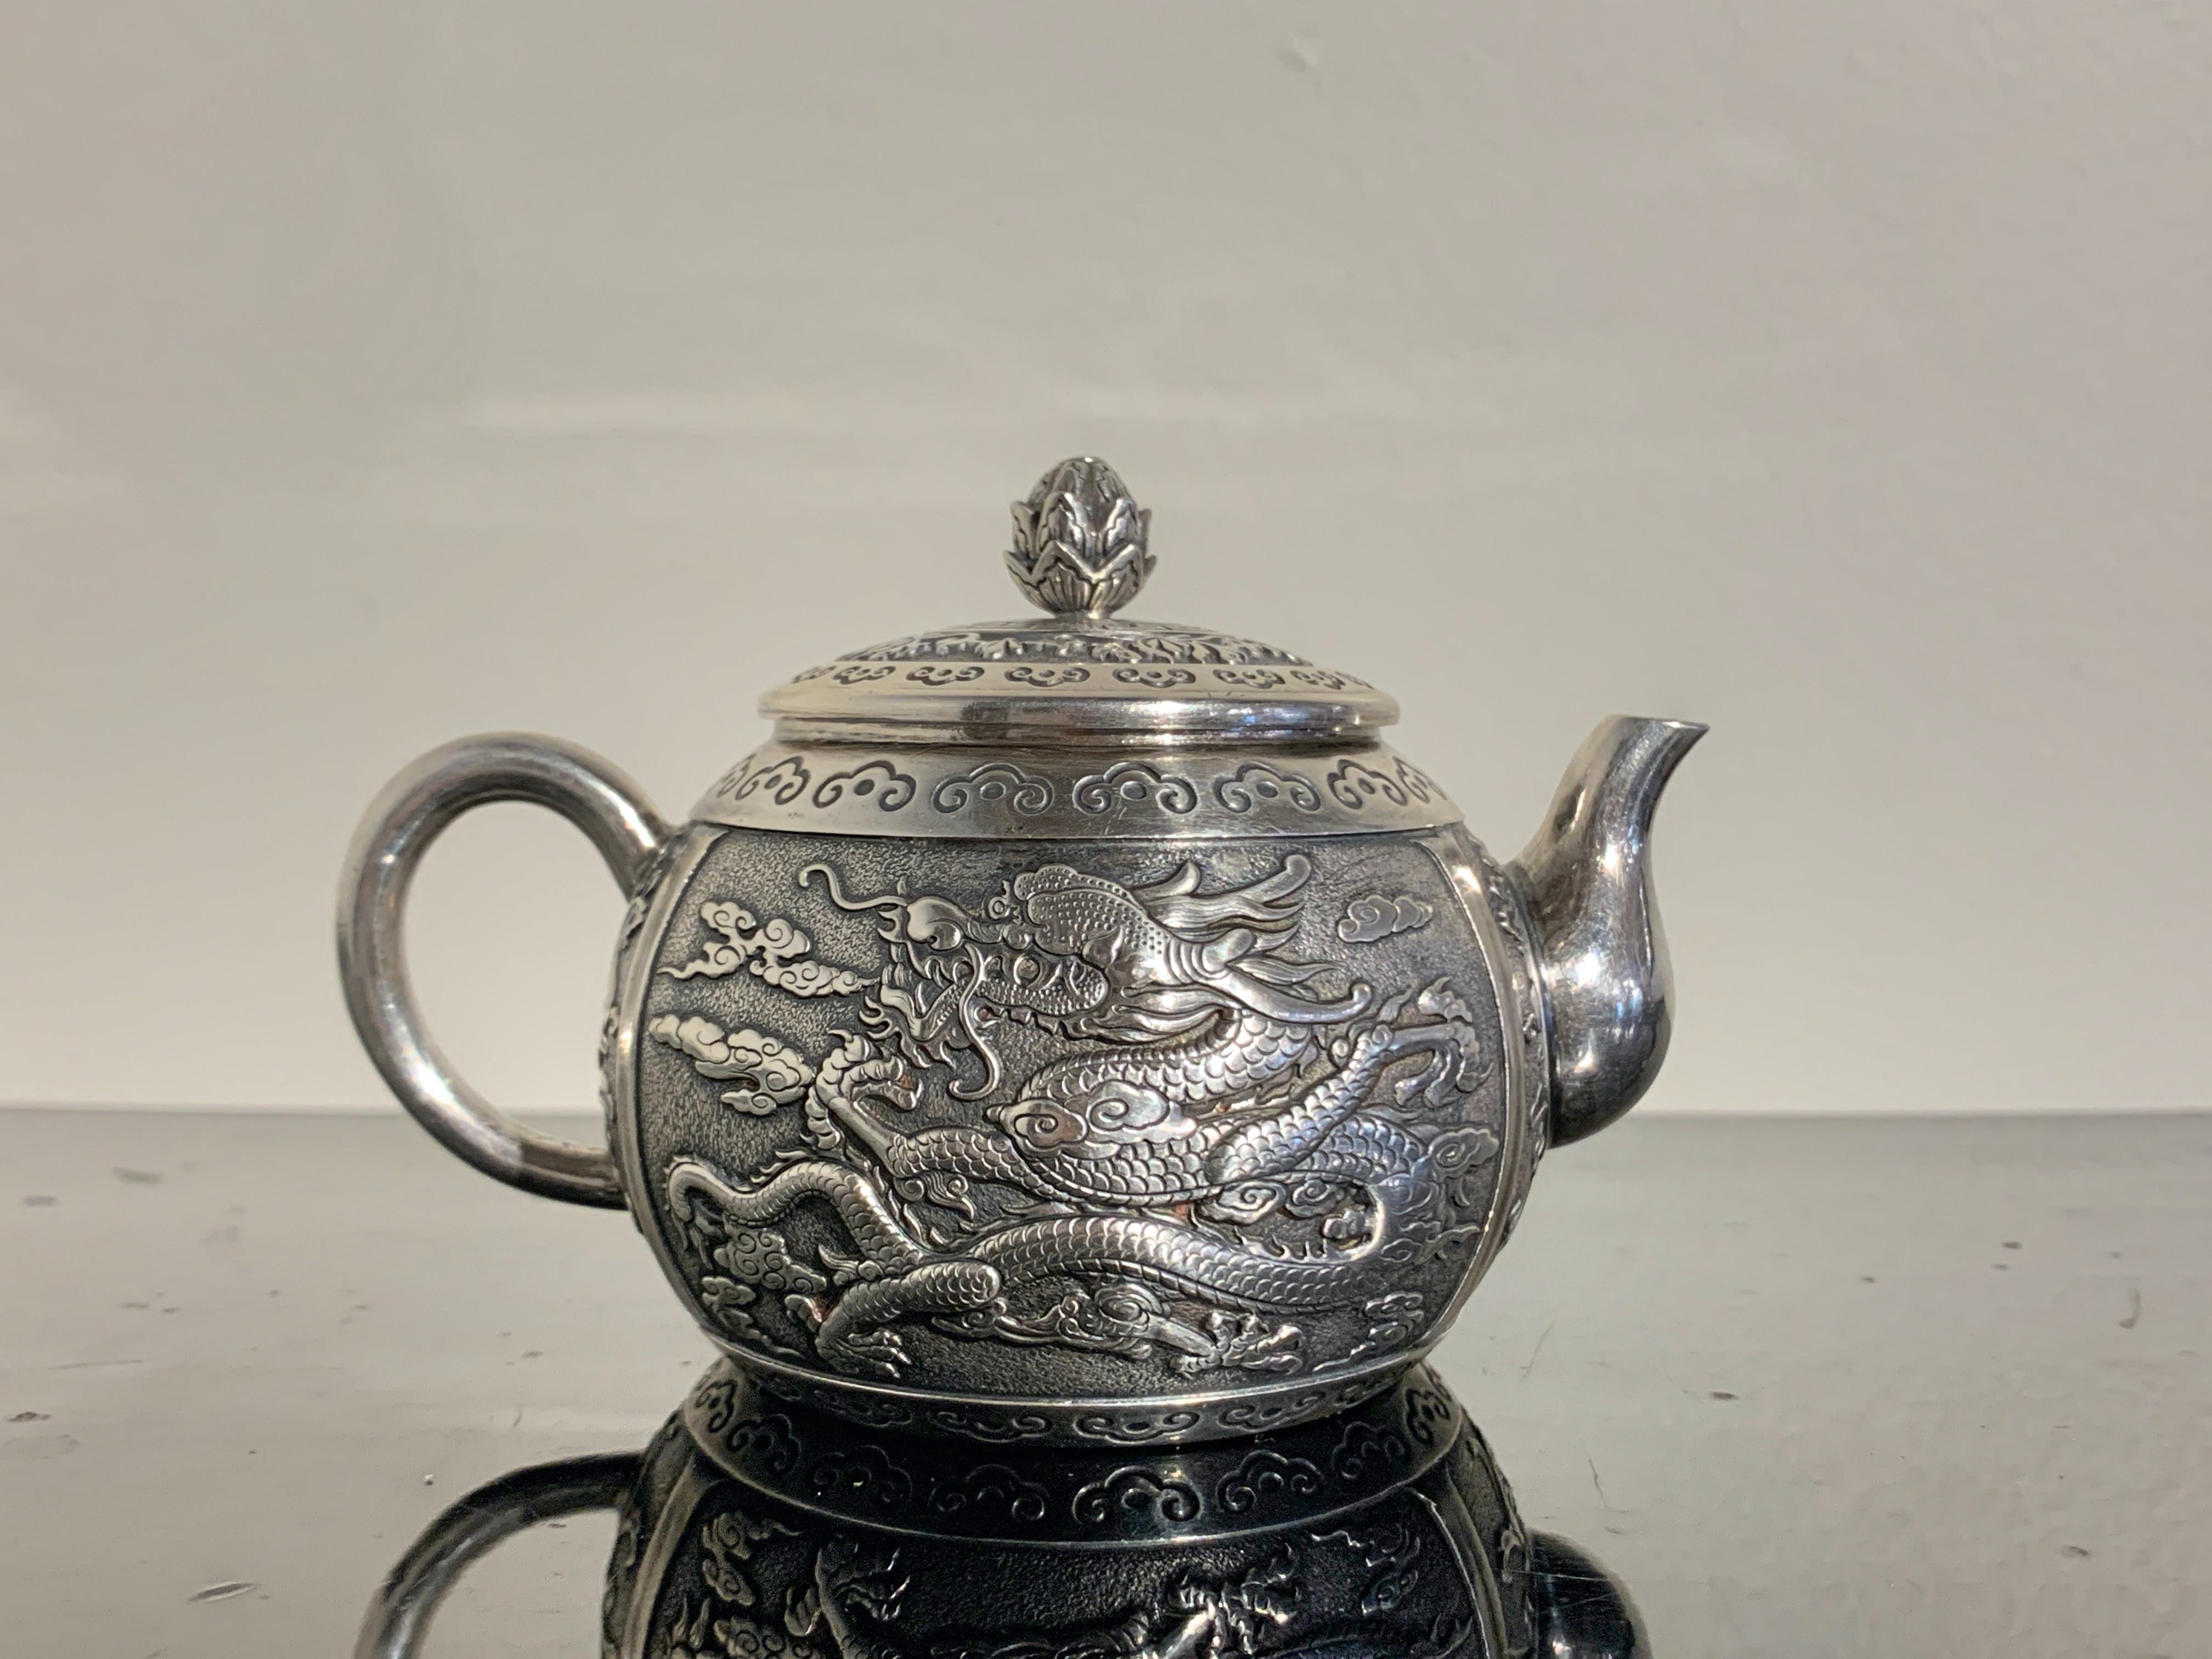 A fine and heavy diminutive Chinese export silver dragon teapot, by Wang Hing & Co, late 19th century, China. 

The small teapot, of traditional form, is finely crafted from a high quality silver, slightly higher than sterling. 
The globular body